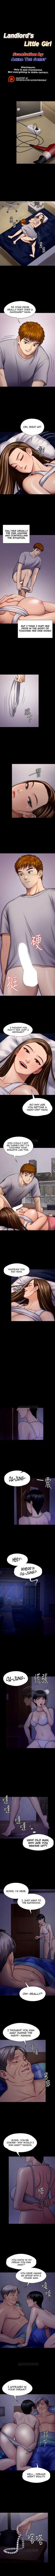 Panel Image 1 for chapter 119 of manhwa Queen Bee on read.oppai.stream